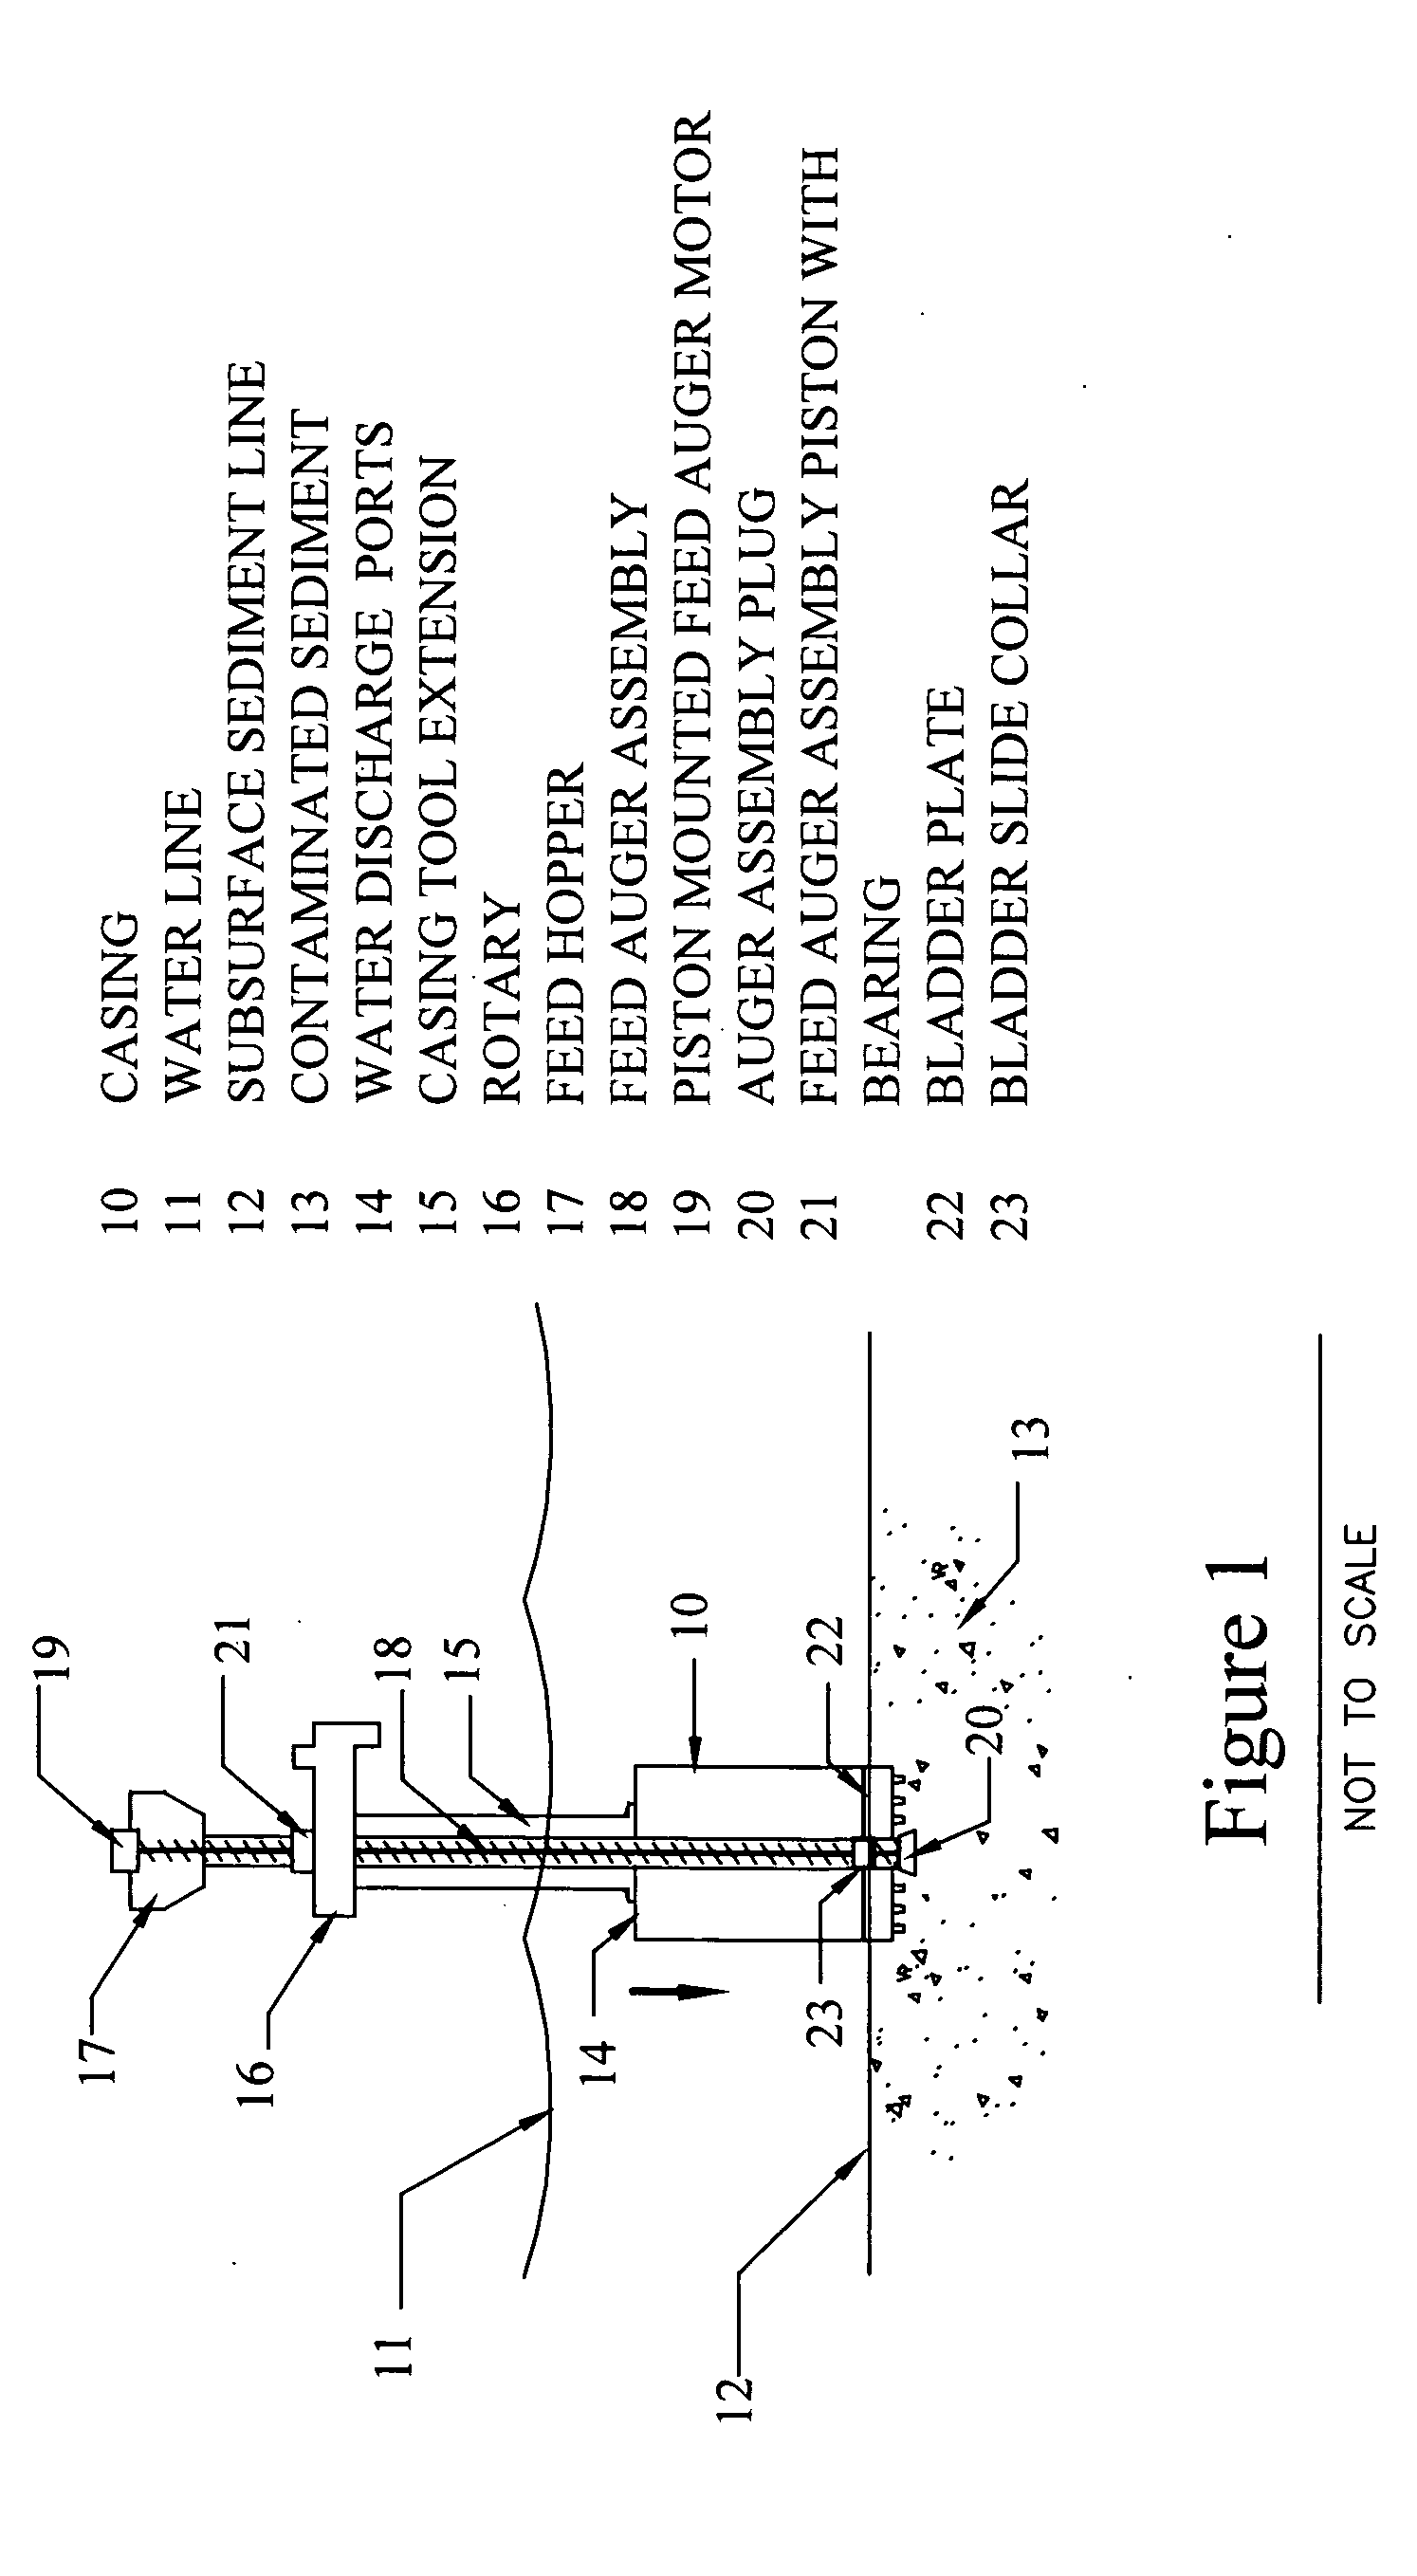 Rotating containment tool for contaminated sediment remediation in an aqueous environment